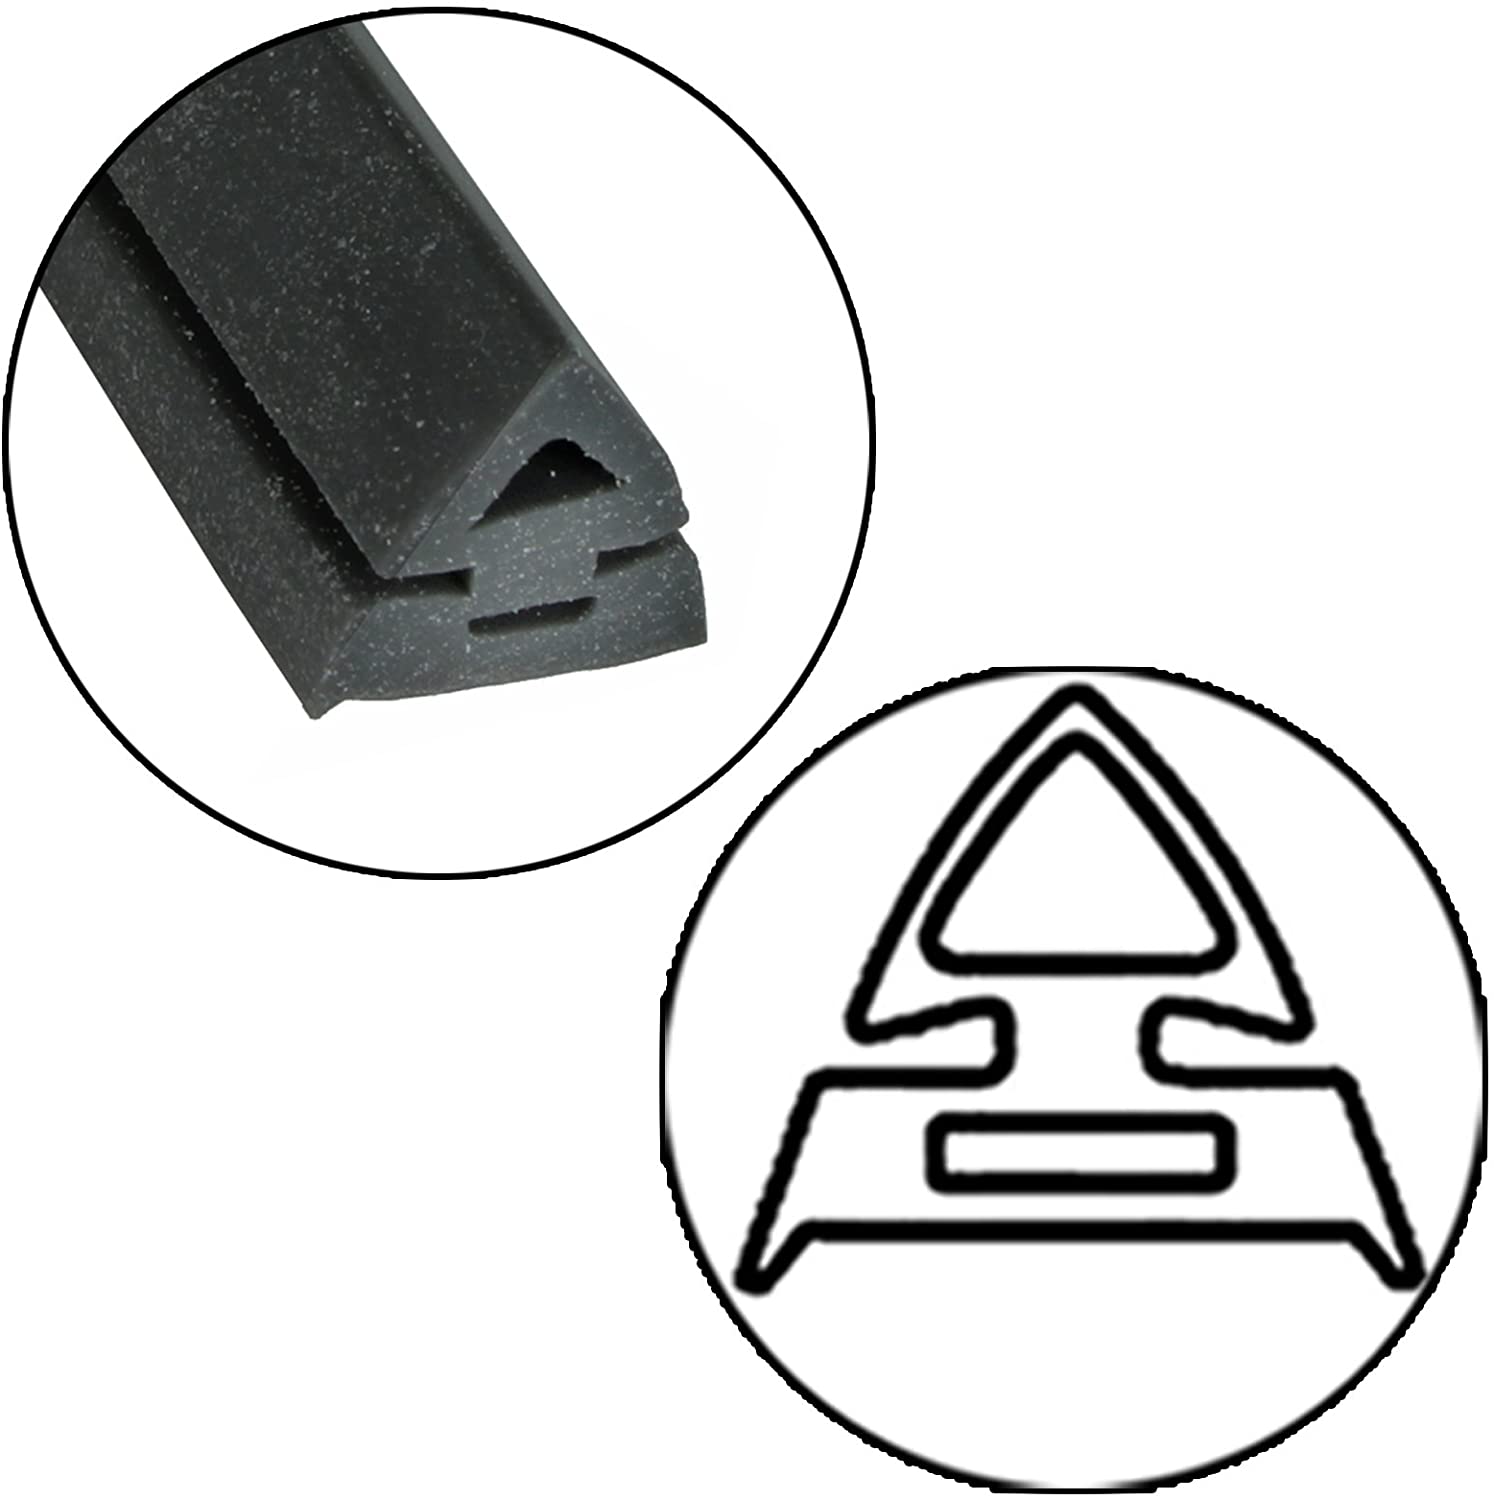 3m Cut to Size Door Seal for Diplomat Hygena Schreiber 3 or 4 Sided Oven Cooker (Rounded or 90º Clips)